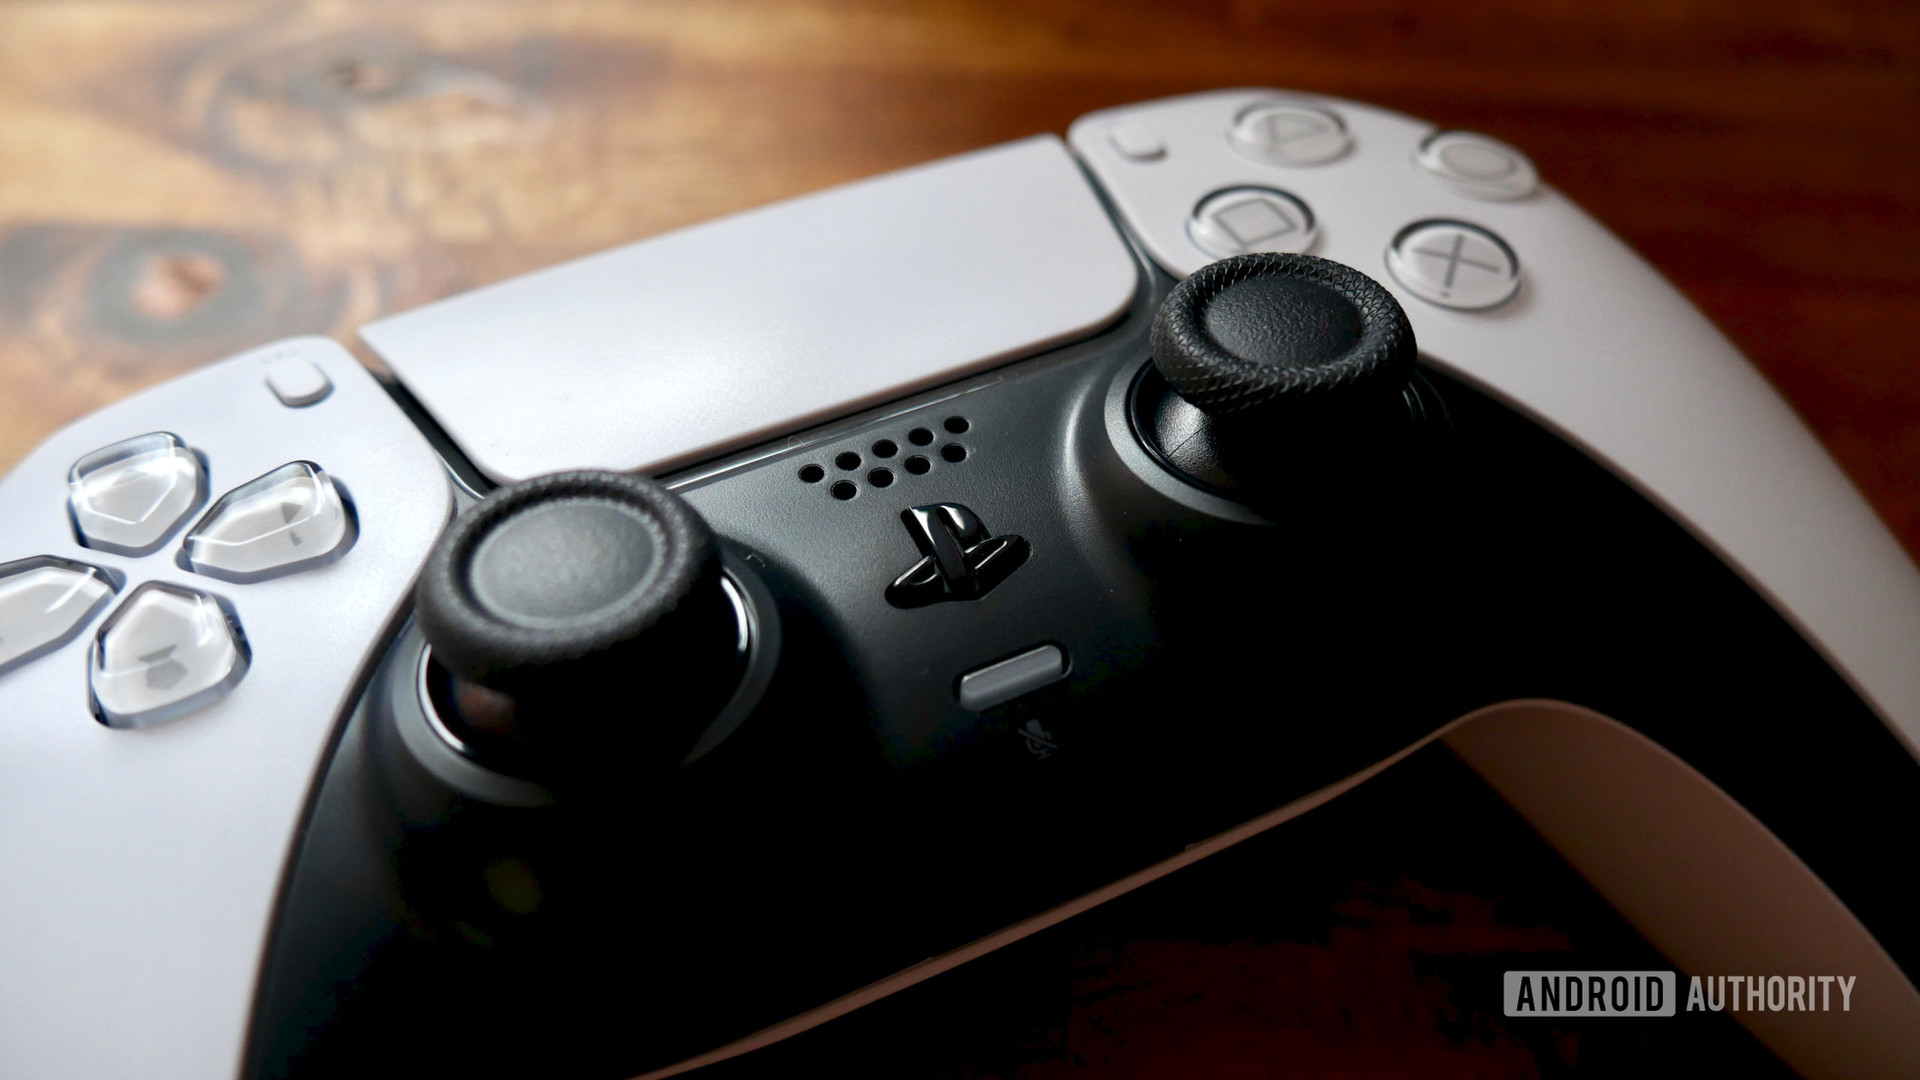 Sony's DualSense controller can now be updated on a PC, no PS5 needed